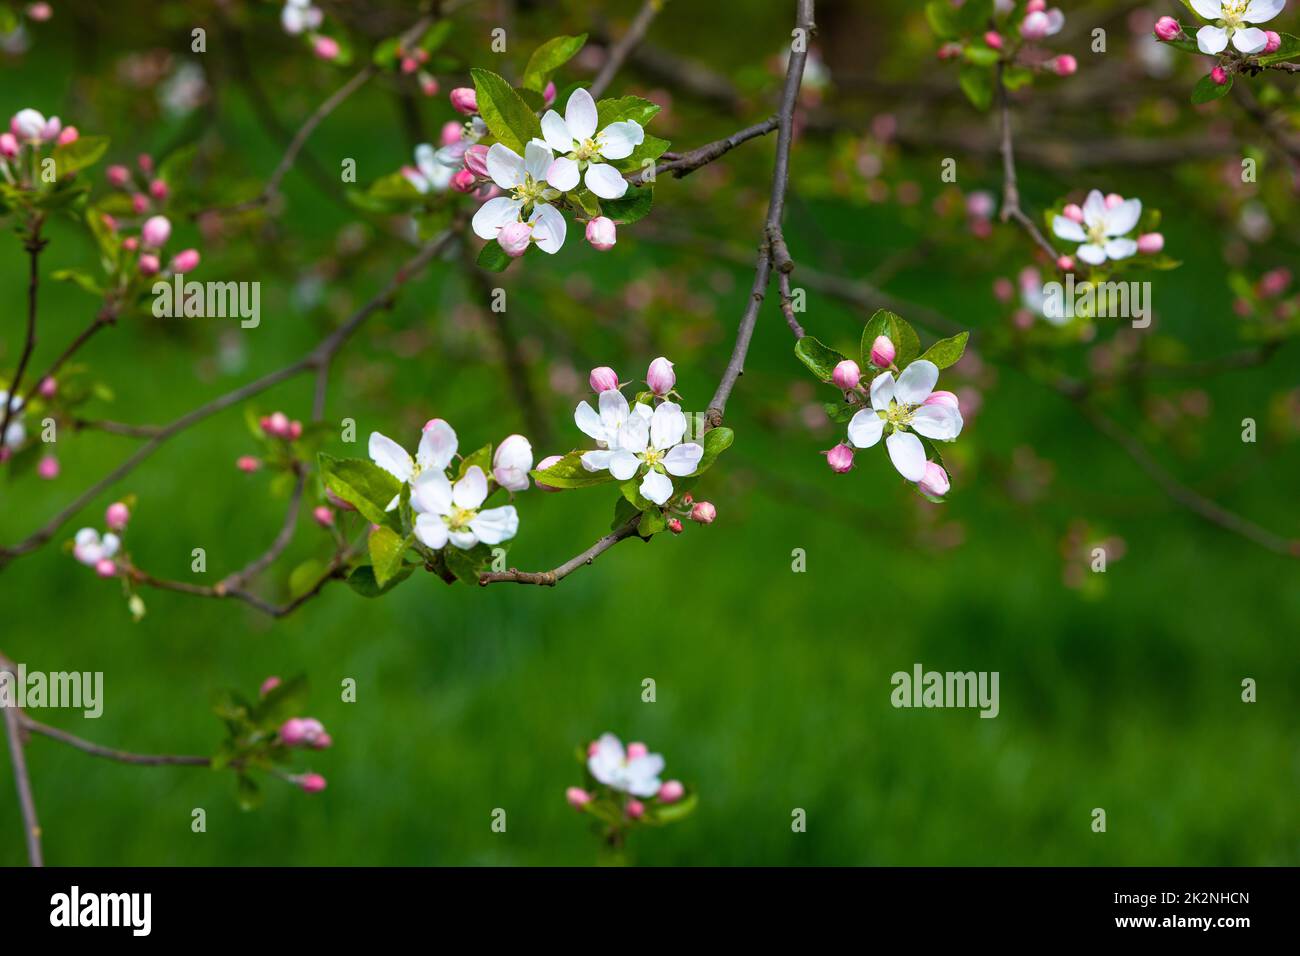 nice background of apple blossoms in spring Stock Photo